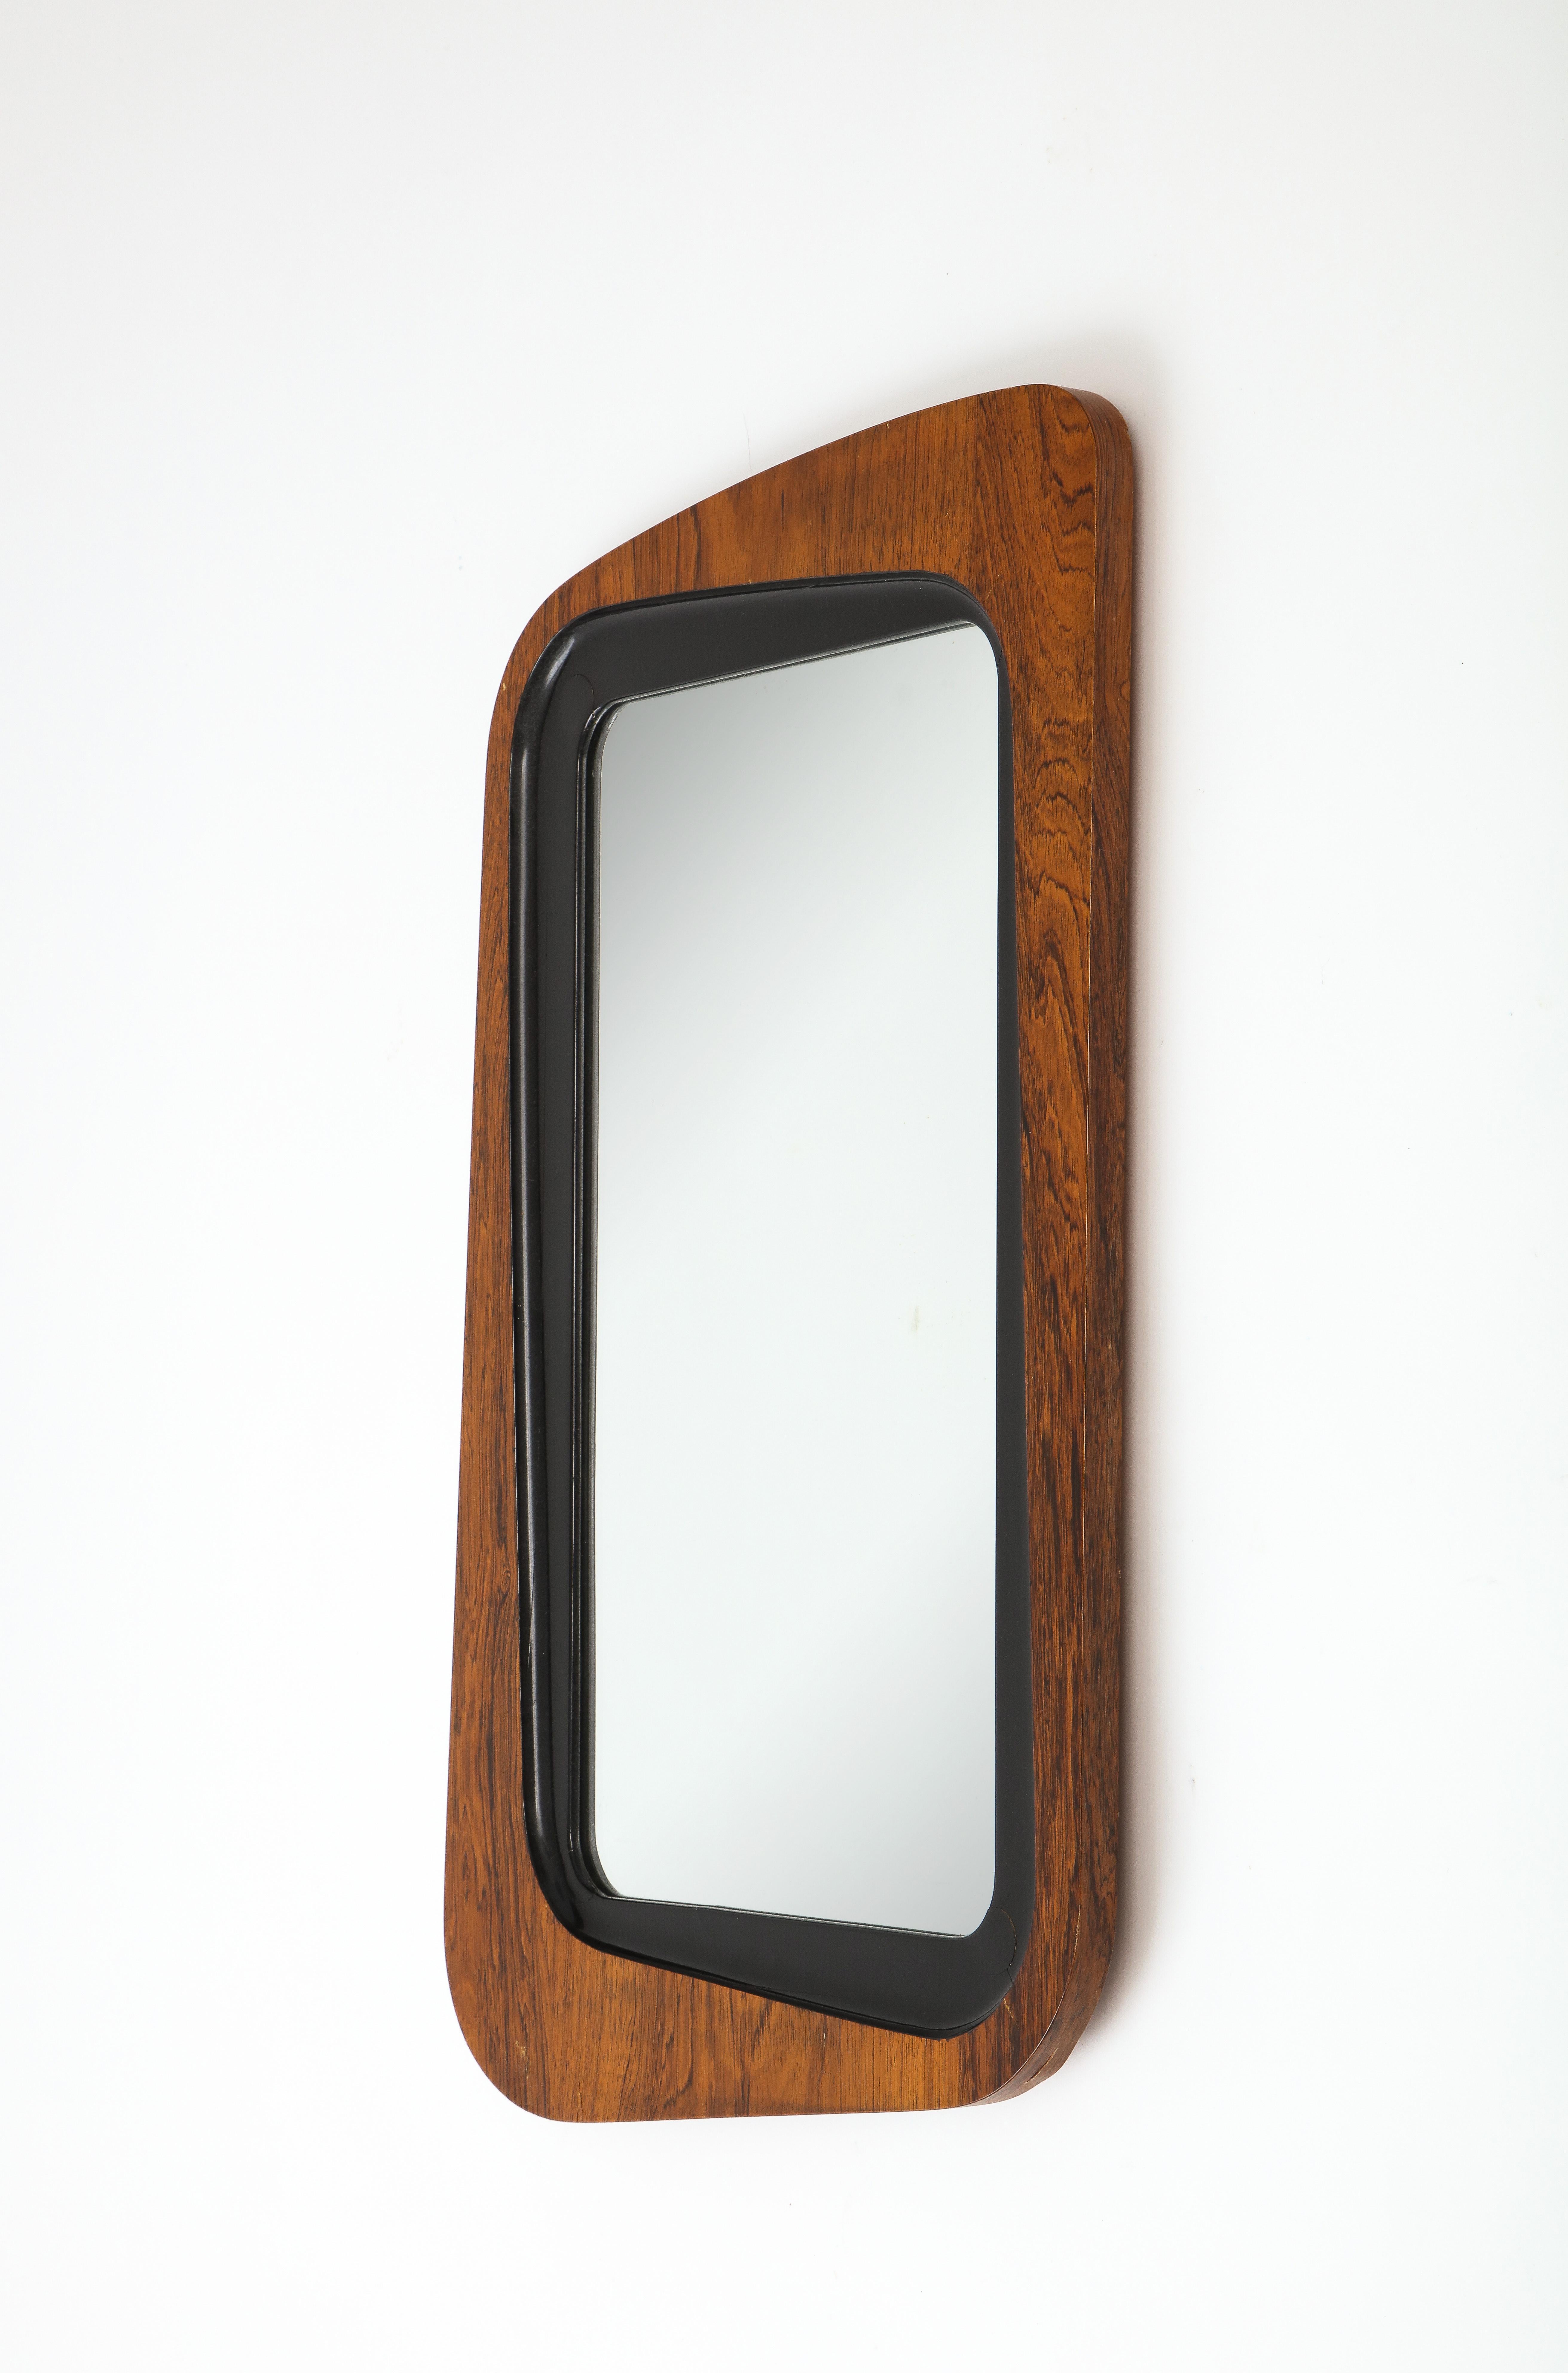 Mid-20th Century Glas & Trä Wall Mirror Rosewood & Painted Wood Hovmantorp, Sweden 1950's For Sale